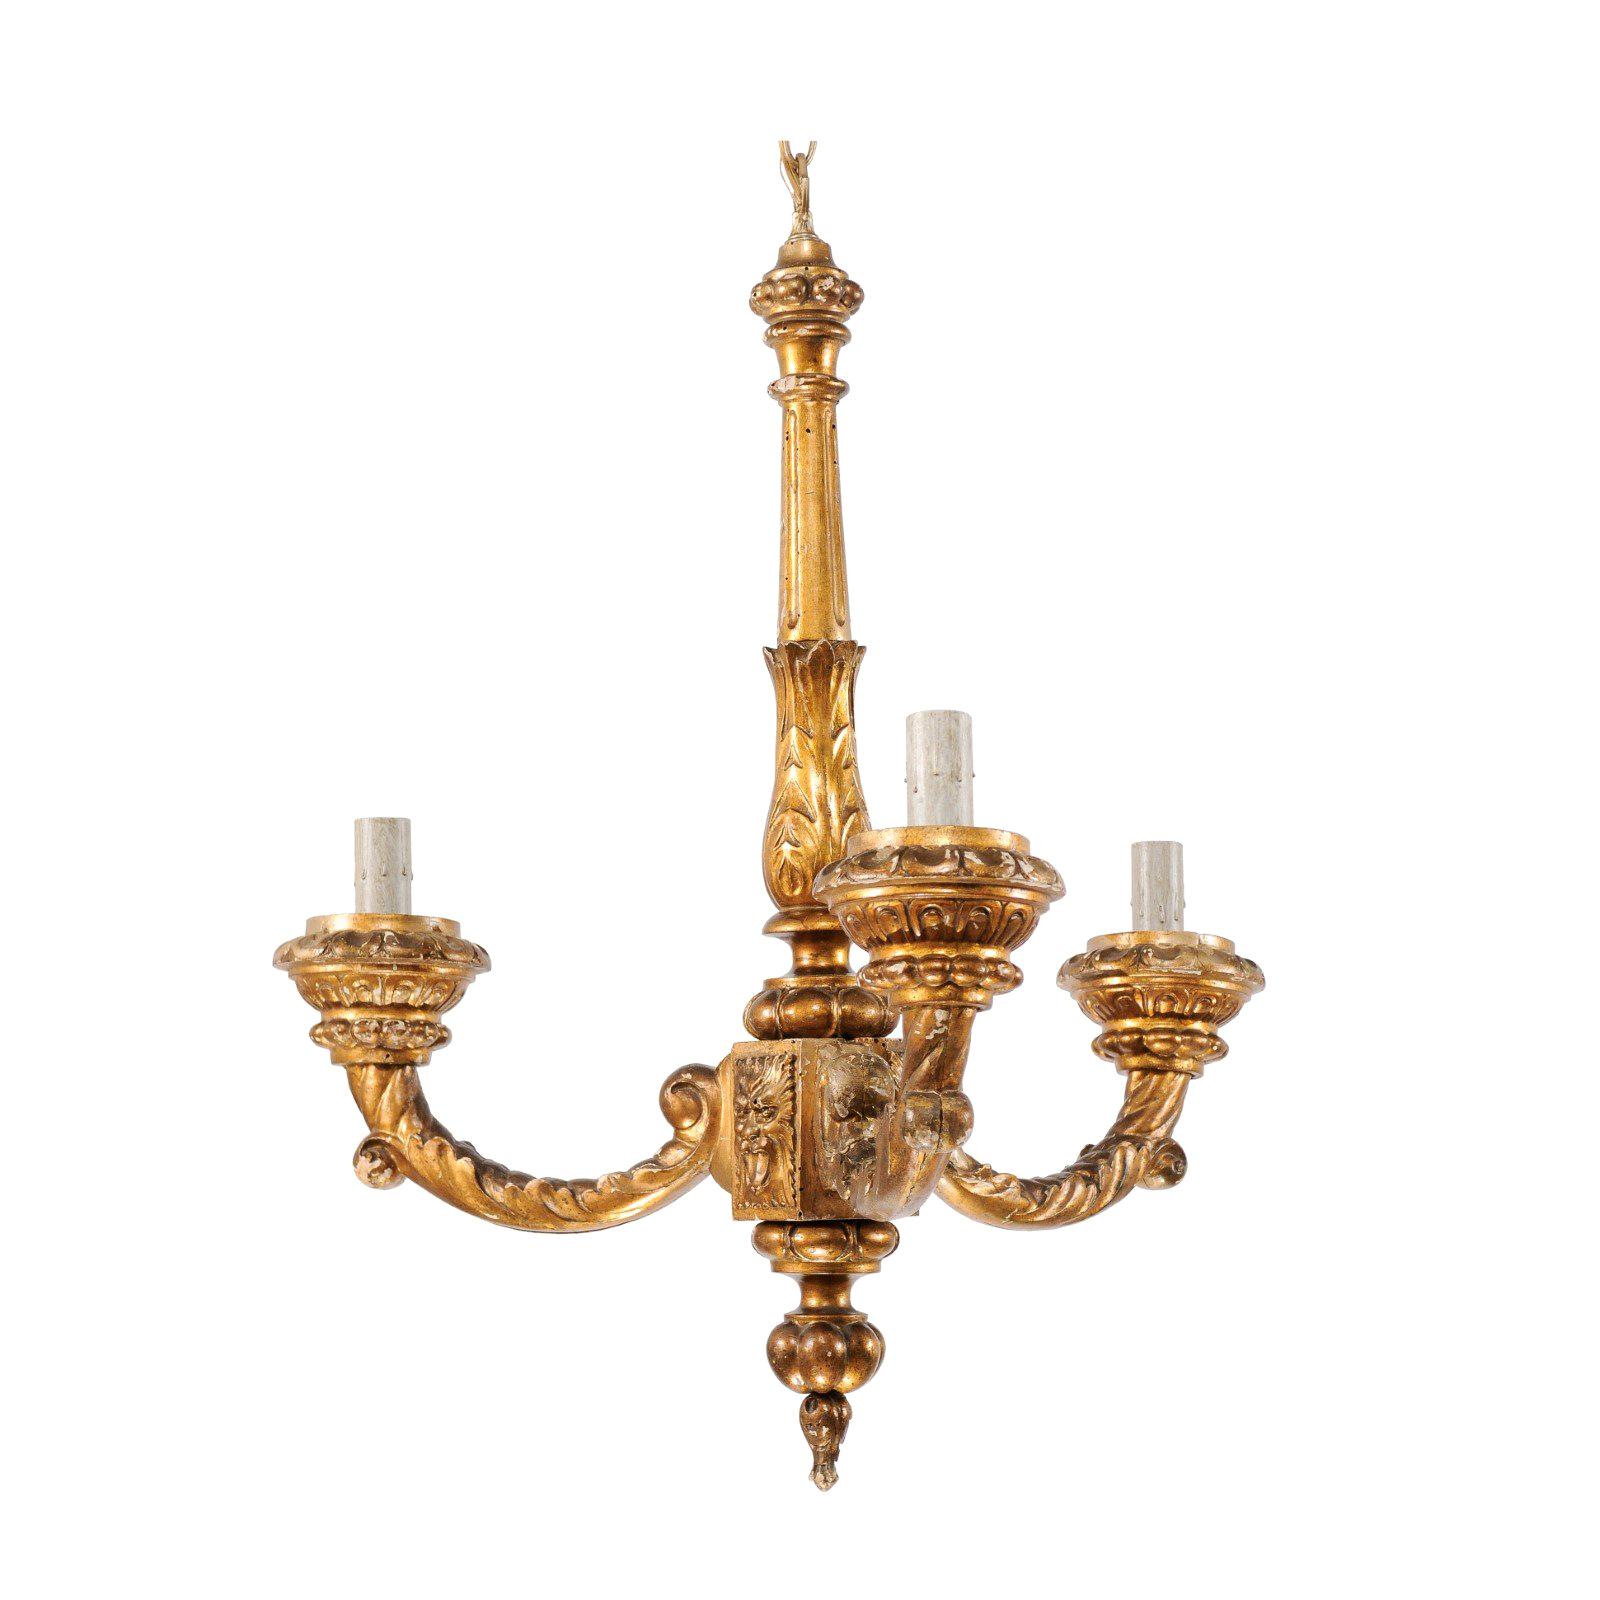 French Three-Light Carved Giltwood Column Chandelier from the Mid-20th Century For Sale